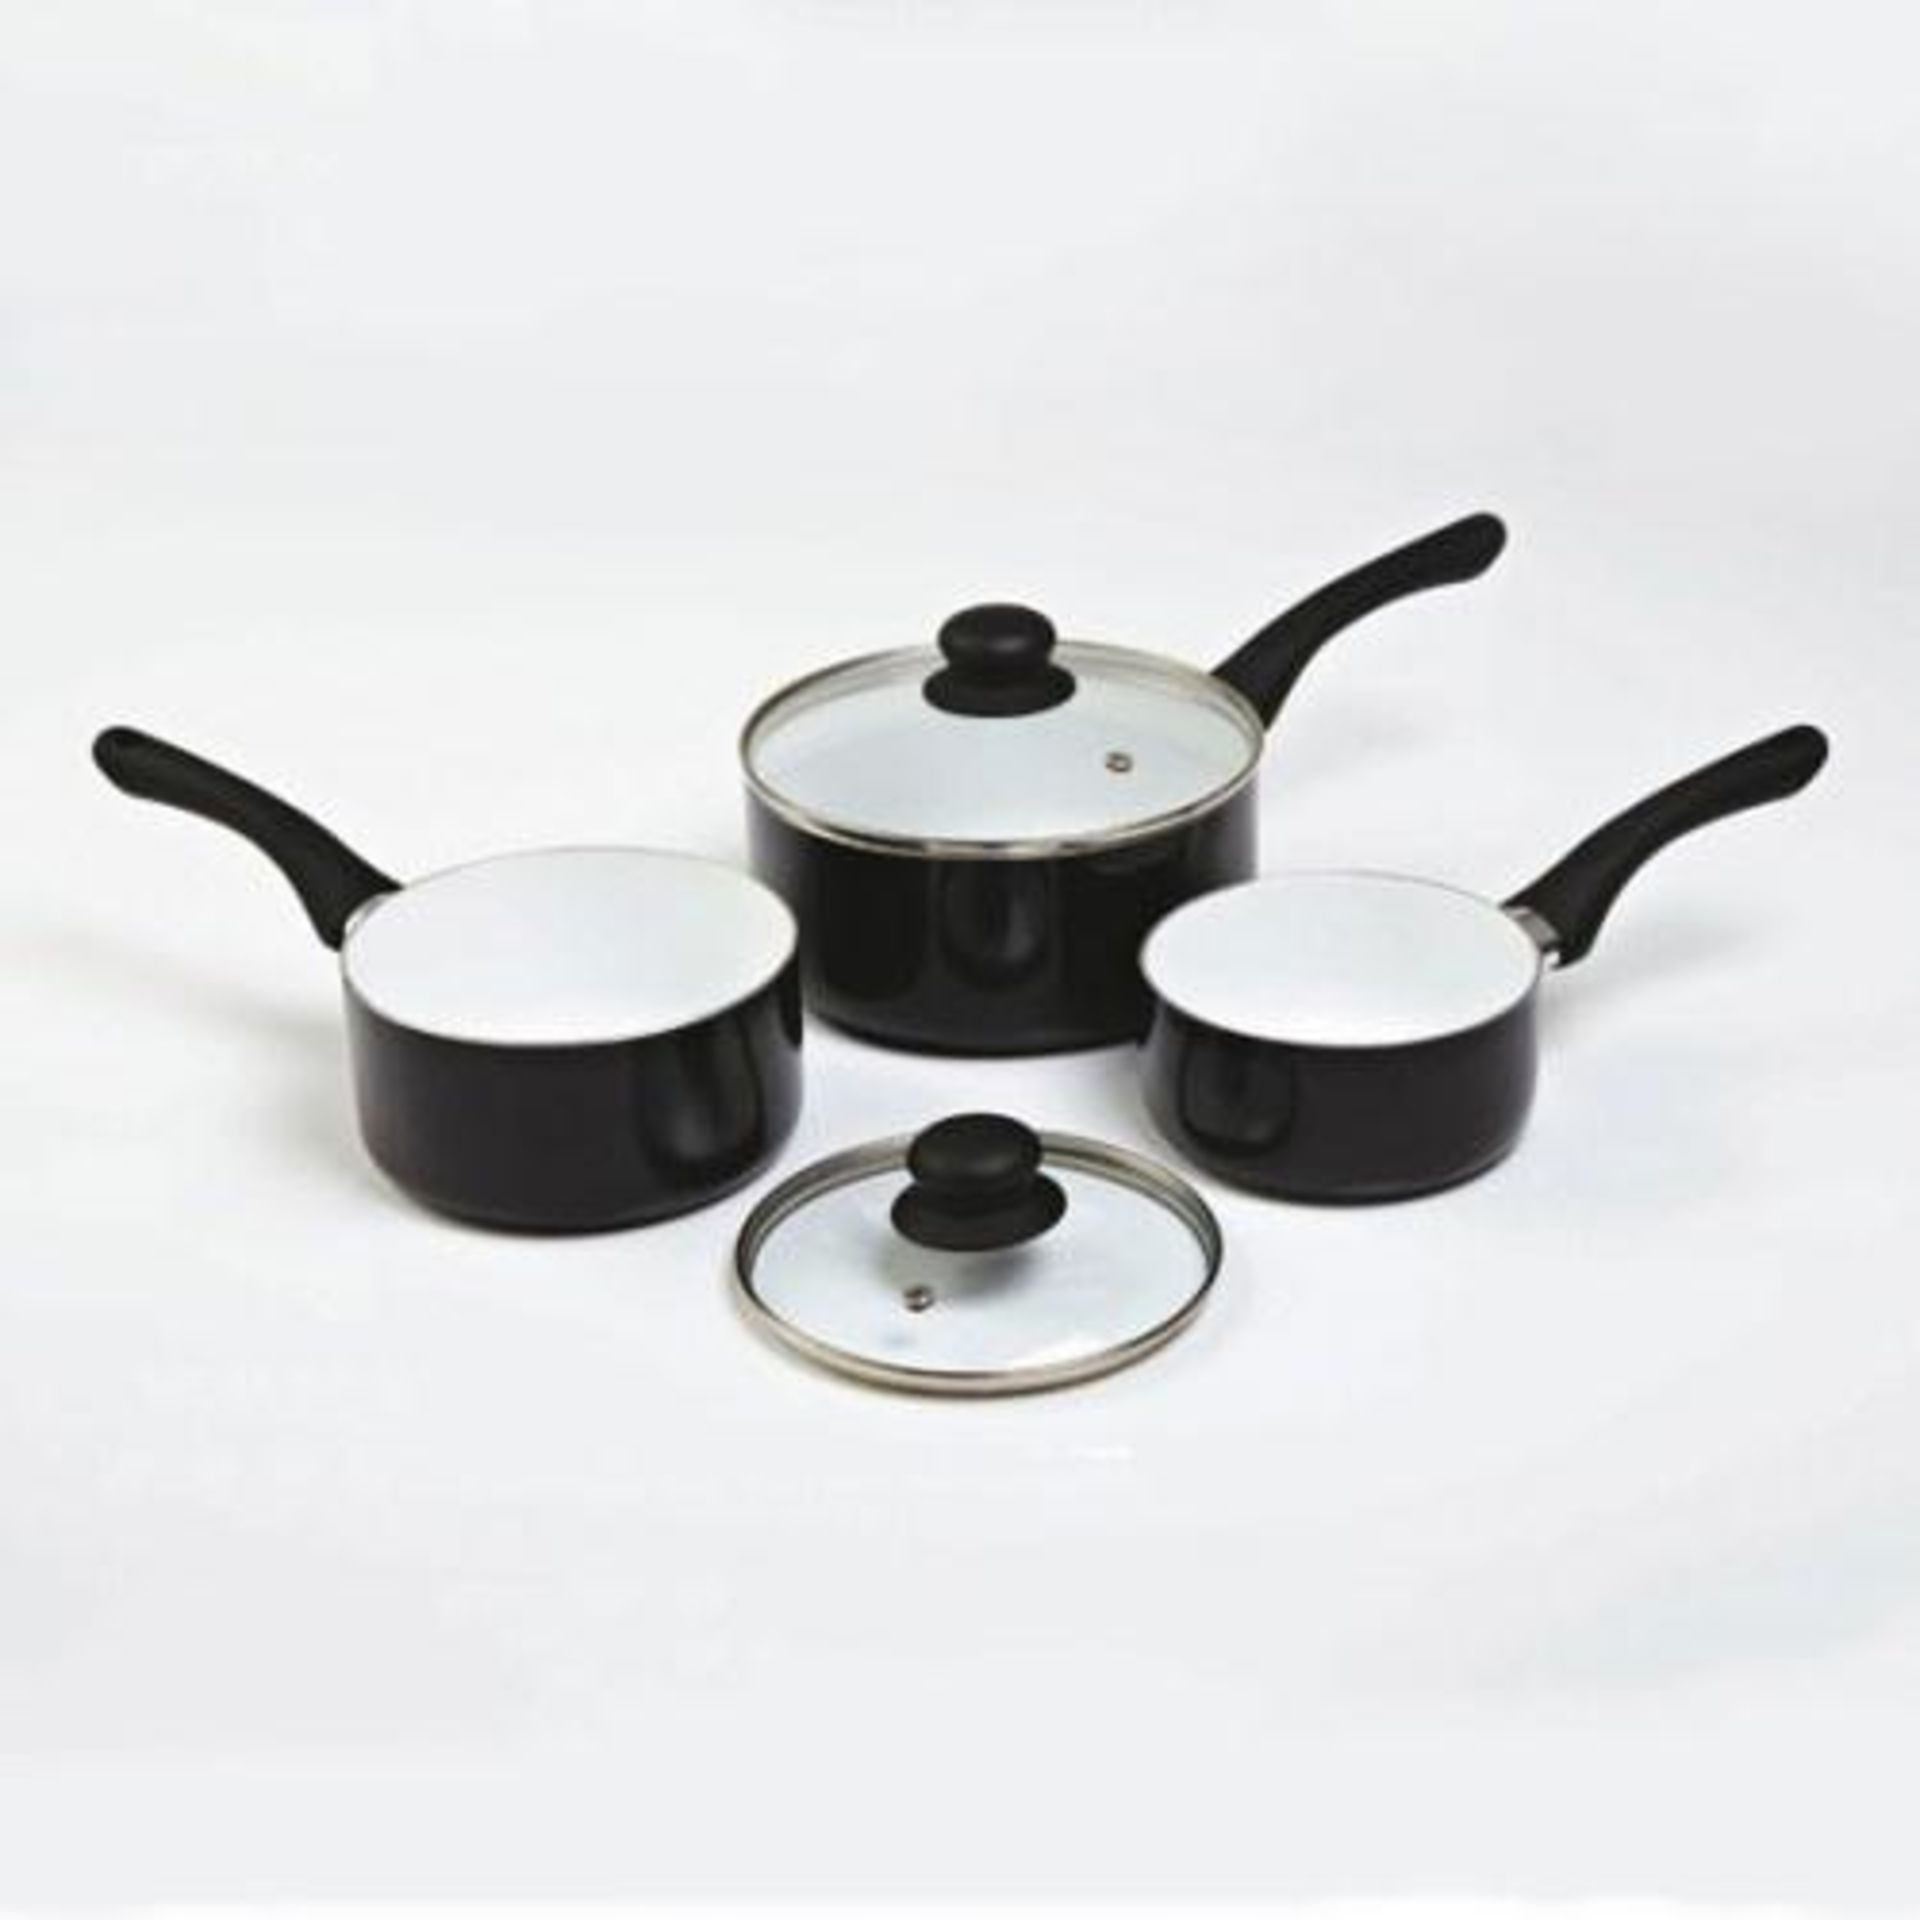 V *TRADE QTY* Brand New Black Five Piece Cermalon Nonstick Ceramic Coating Saucepan Set With Two